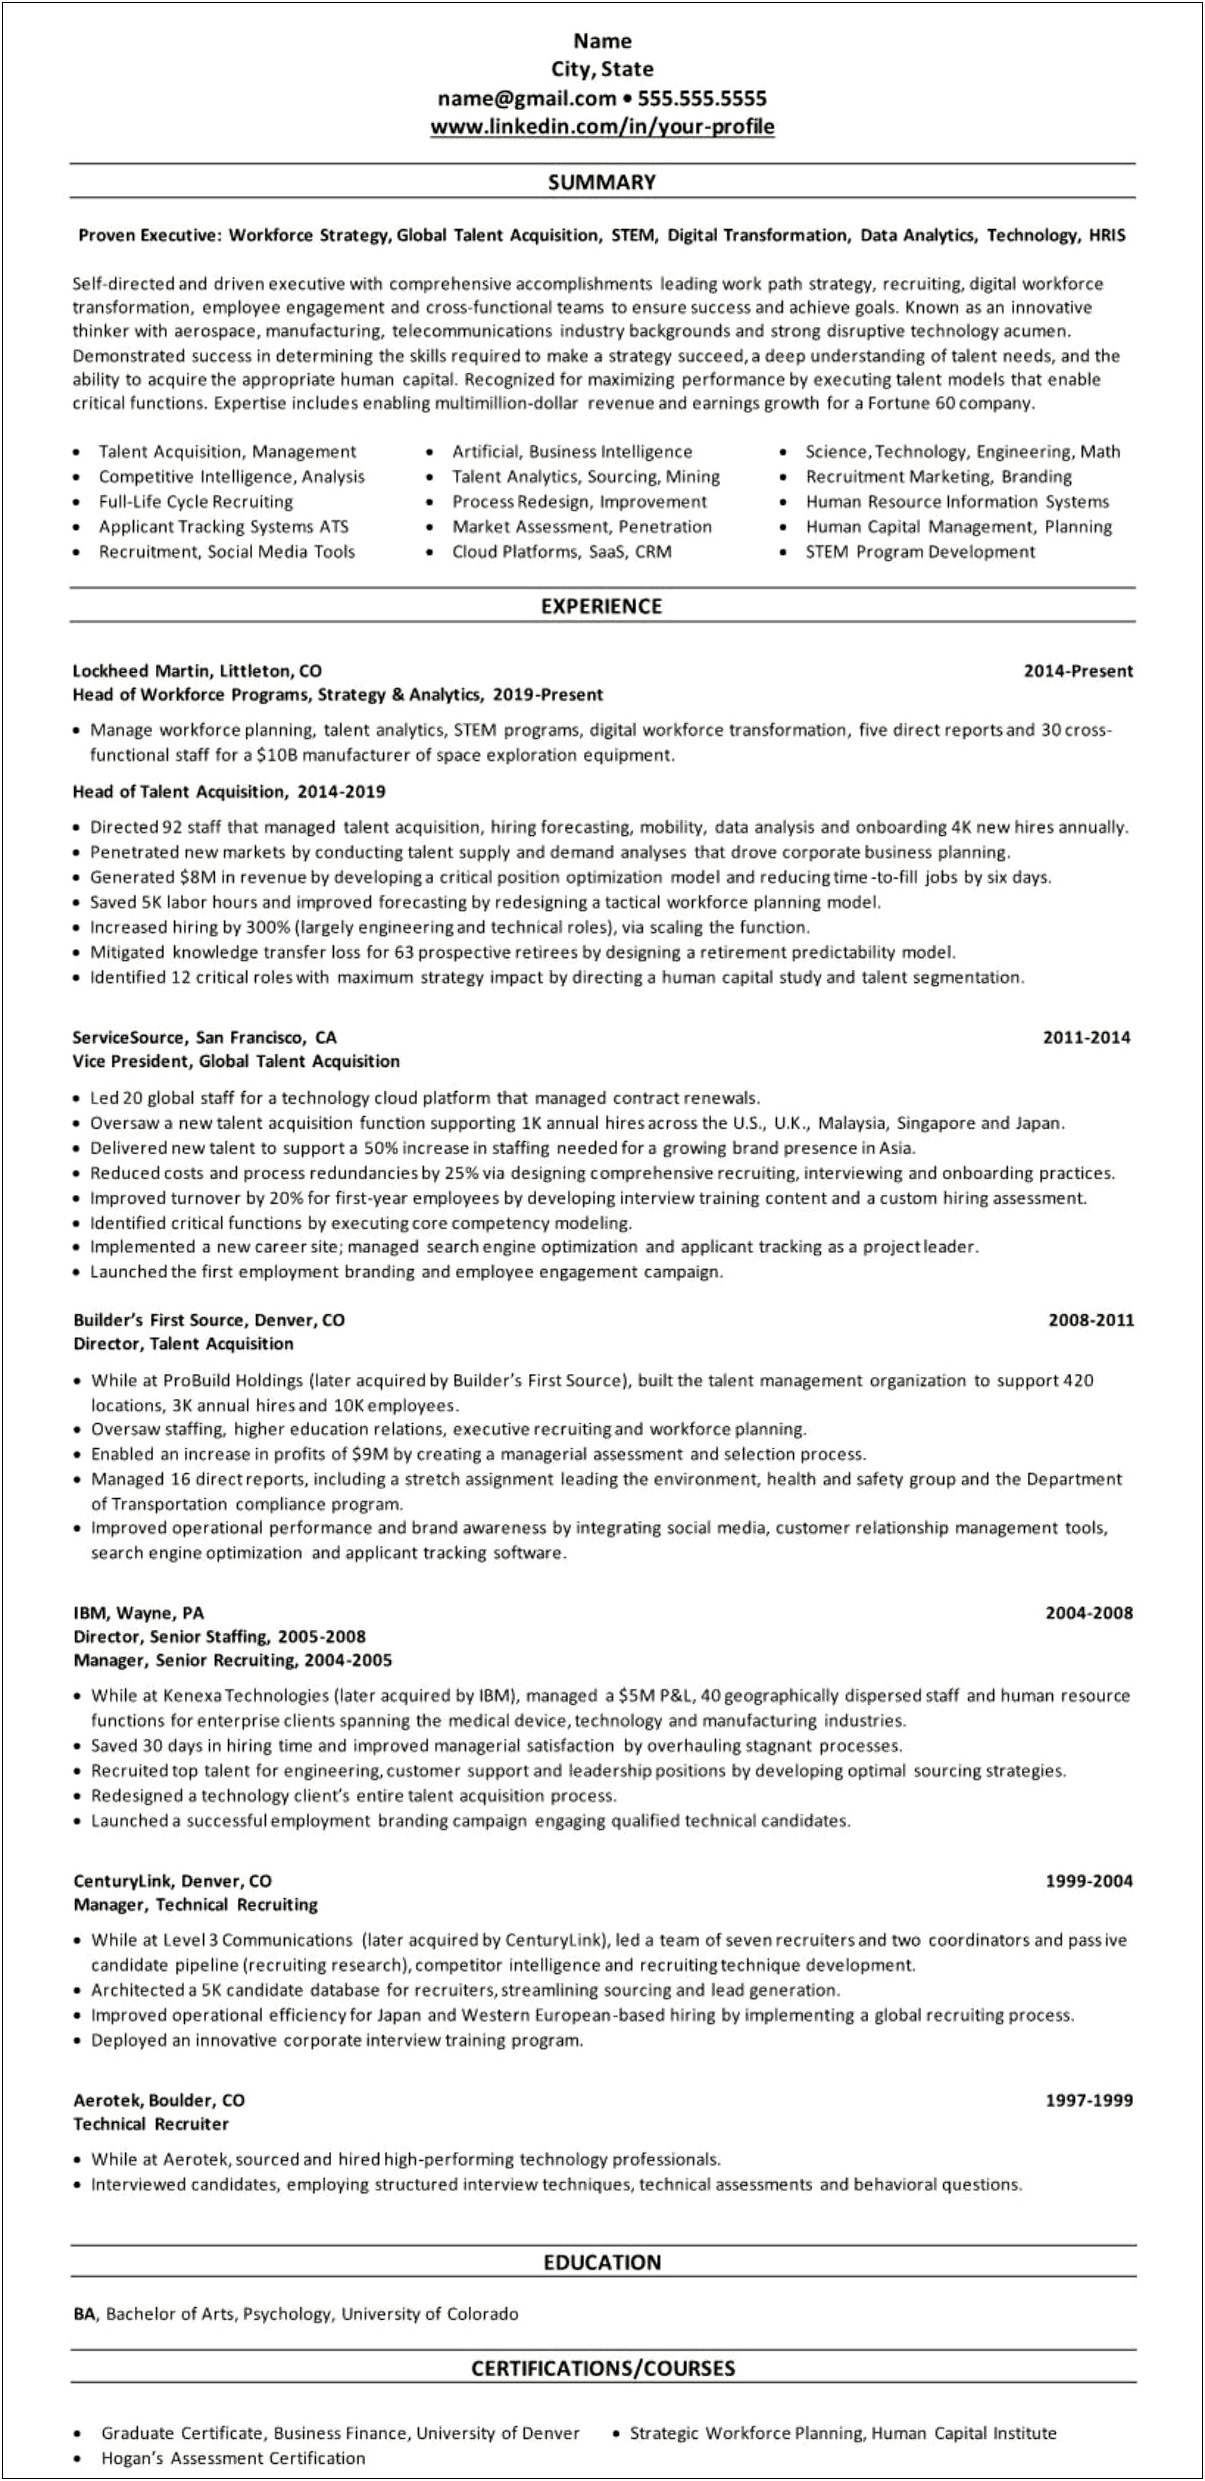 Resume Summary For Talent Acquisition Specialist